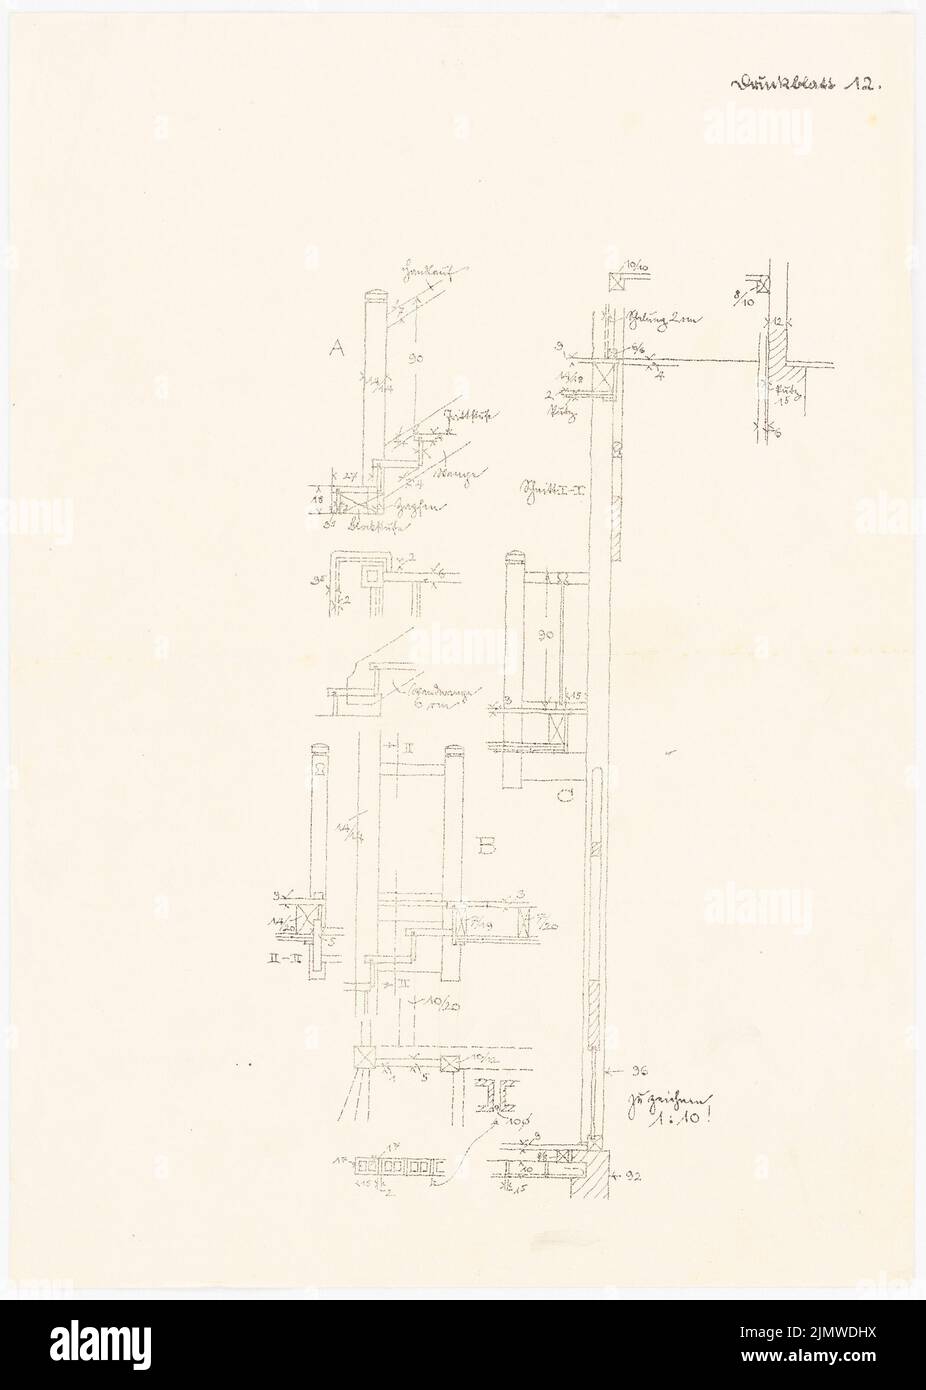 Michel Paul jun. (1922-1943), task sheets and drawing templates. Stair runs (approx. 1940/1941): Details of staircases, steps etc., cuts, to draw 1:10. Pencil over pressure on paper, 42.8 x 30.5 cm (including scan edges) Michel Paul jun.  (1922-1943): Aufgabenblätter und Zeichenvorlagen. Treppenläufe Stock Photo